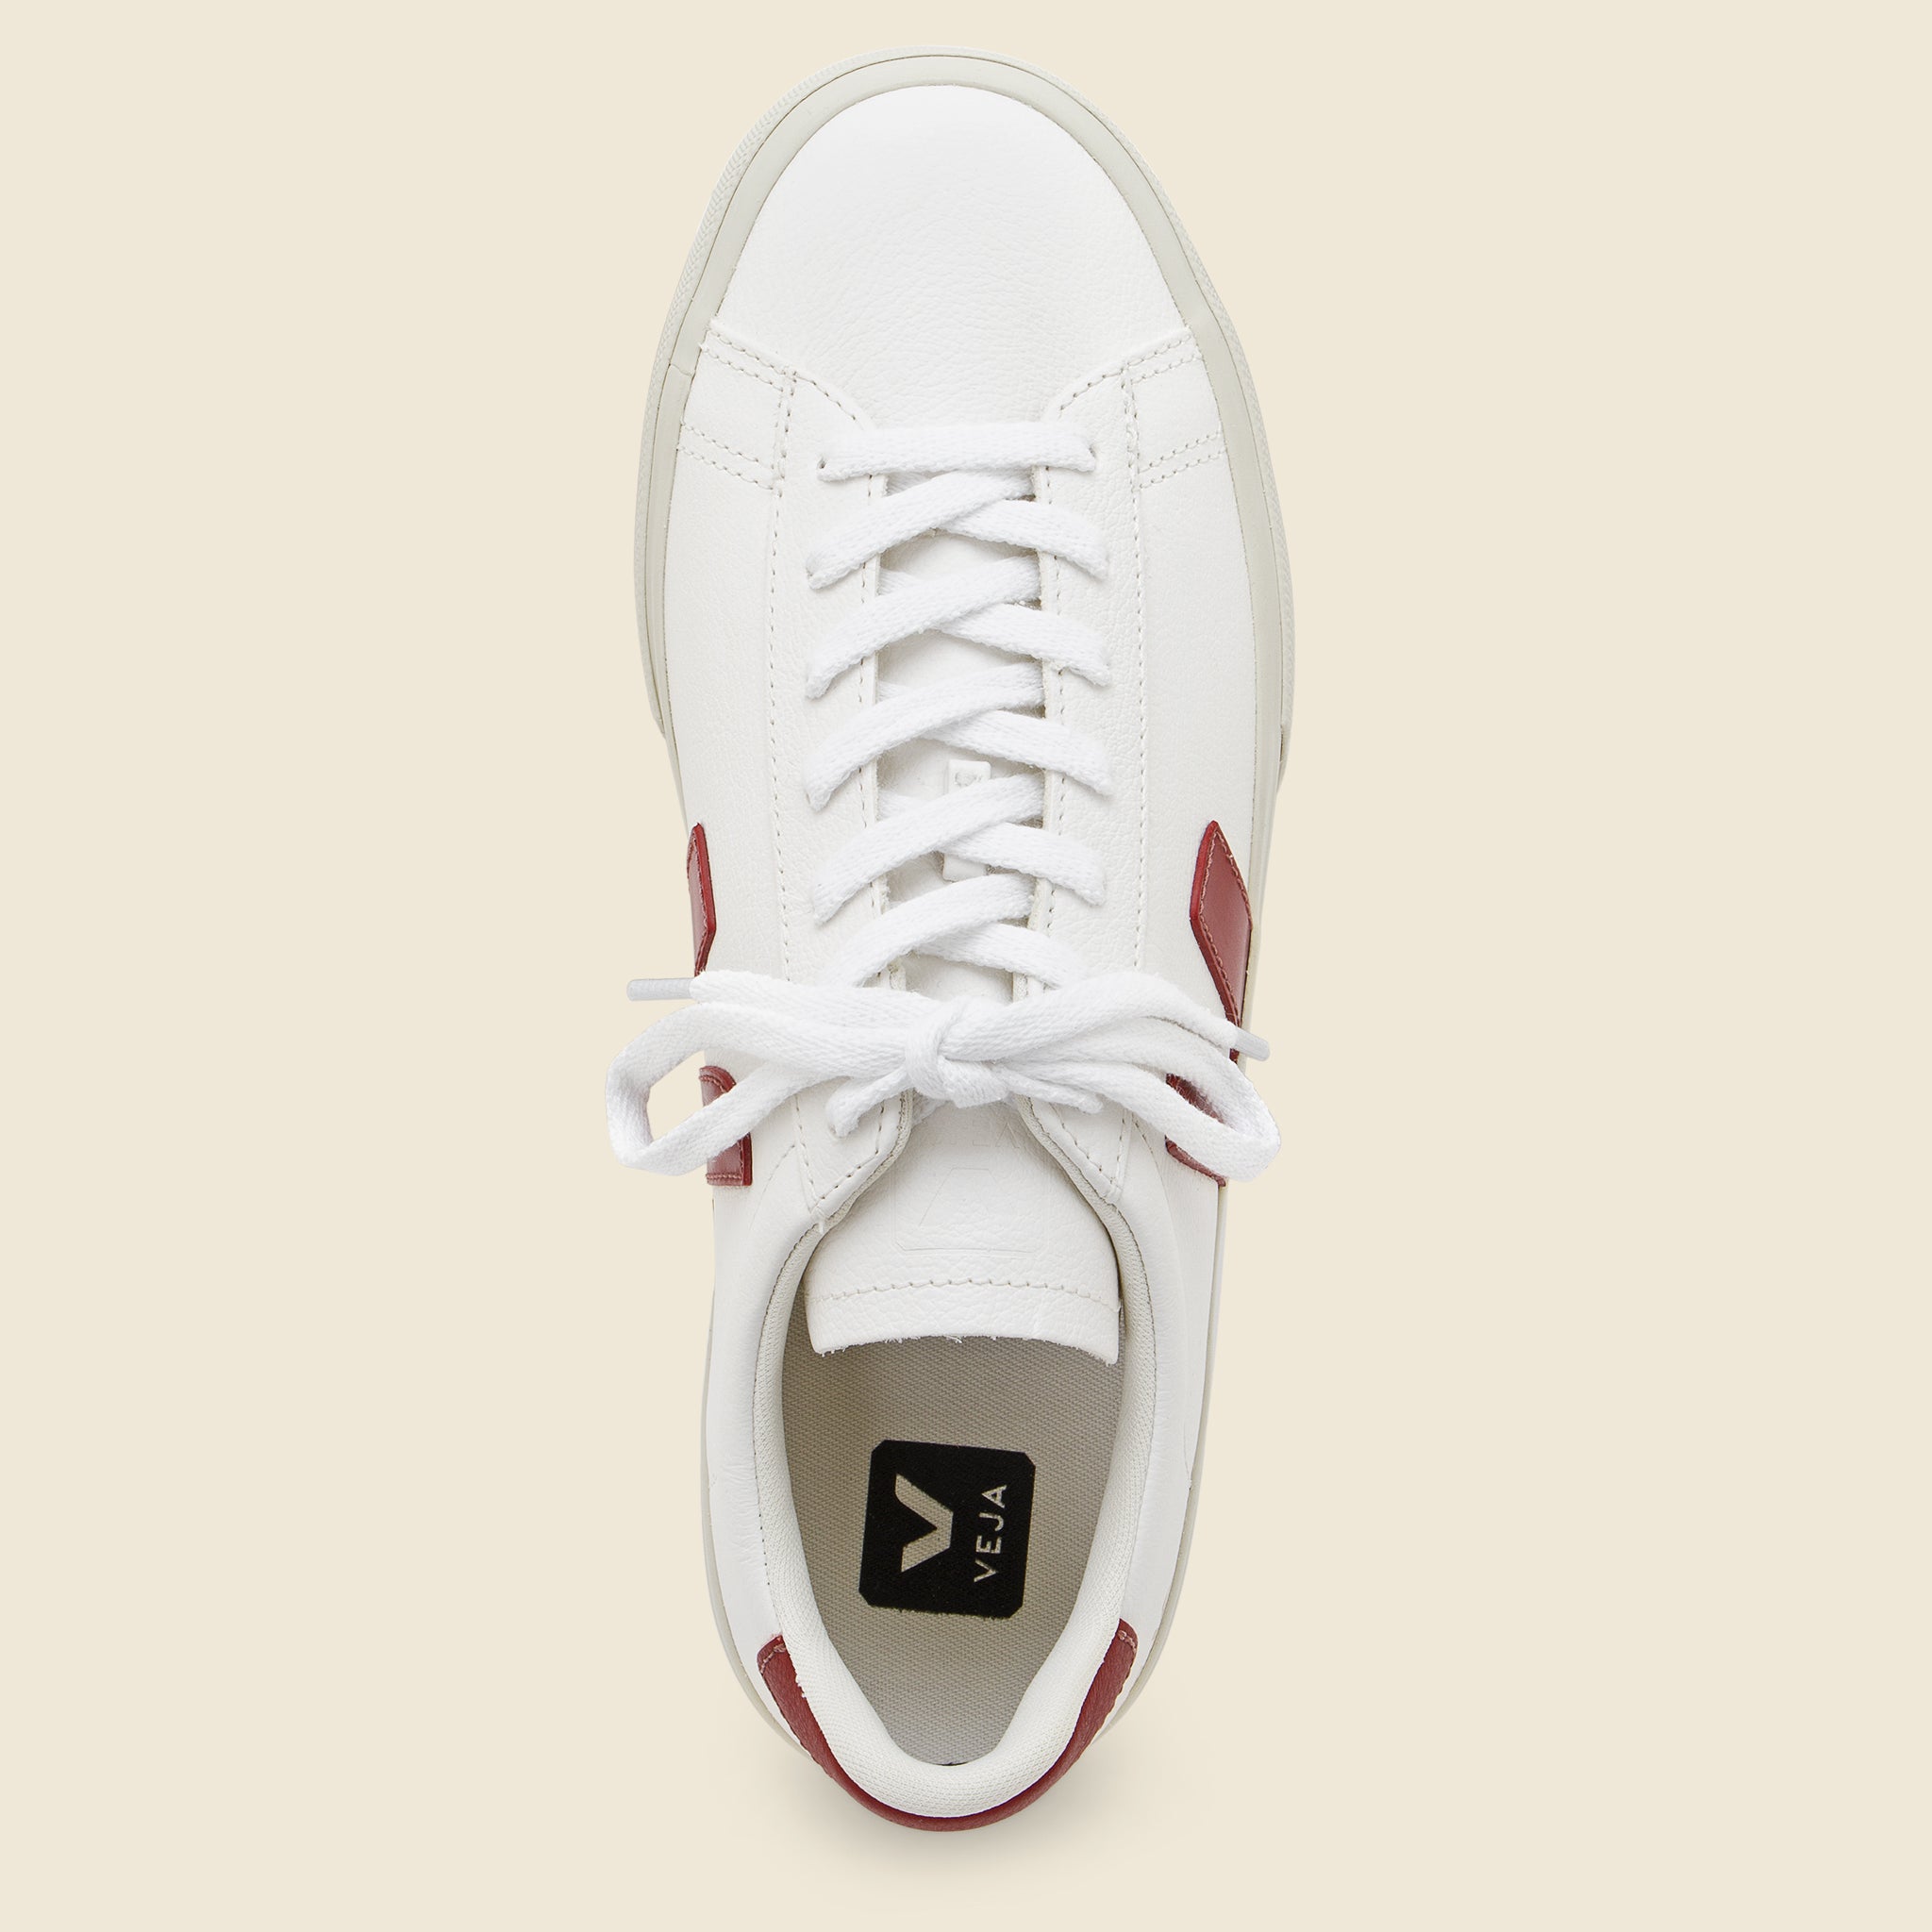 Veja, Campo ChromeFree Leather Sneaker - Extra White/Rouille